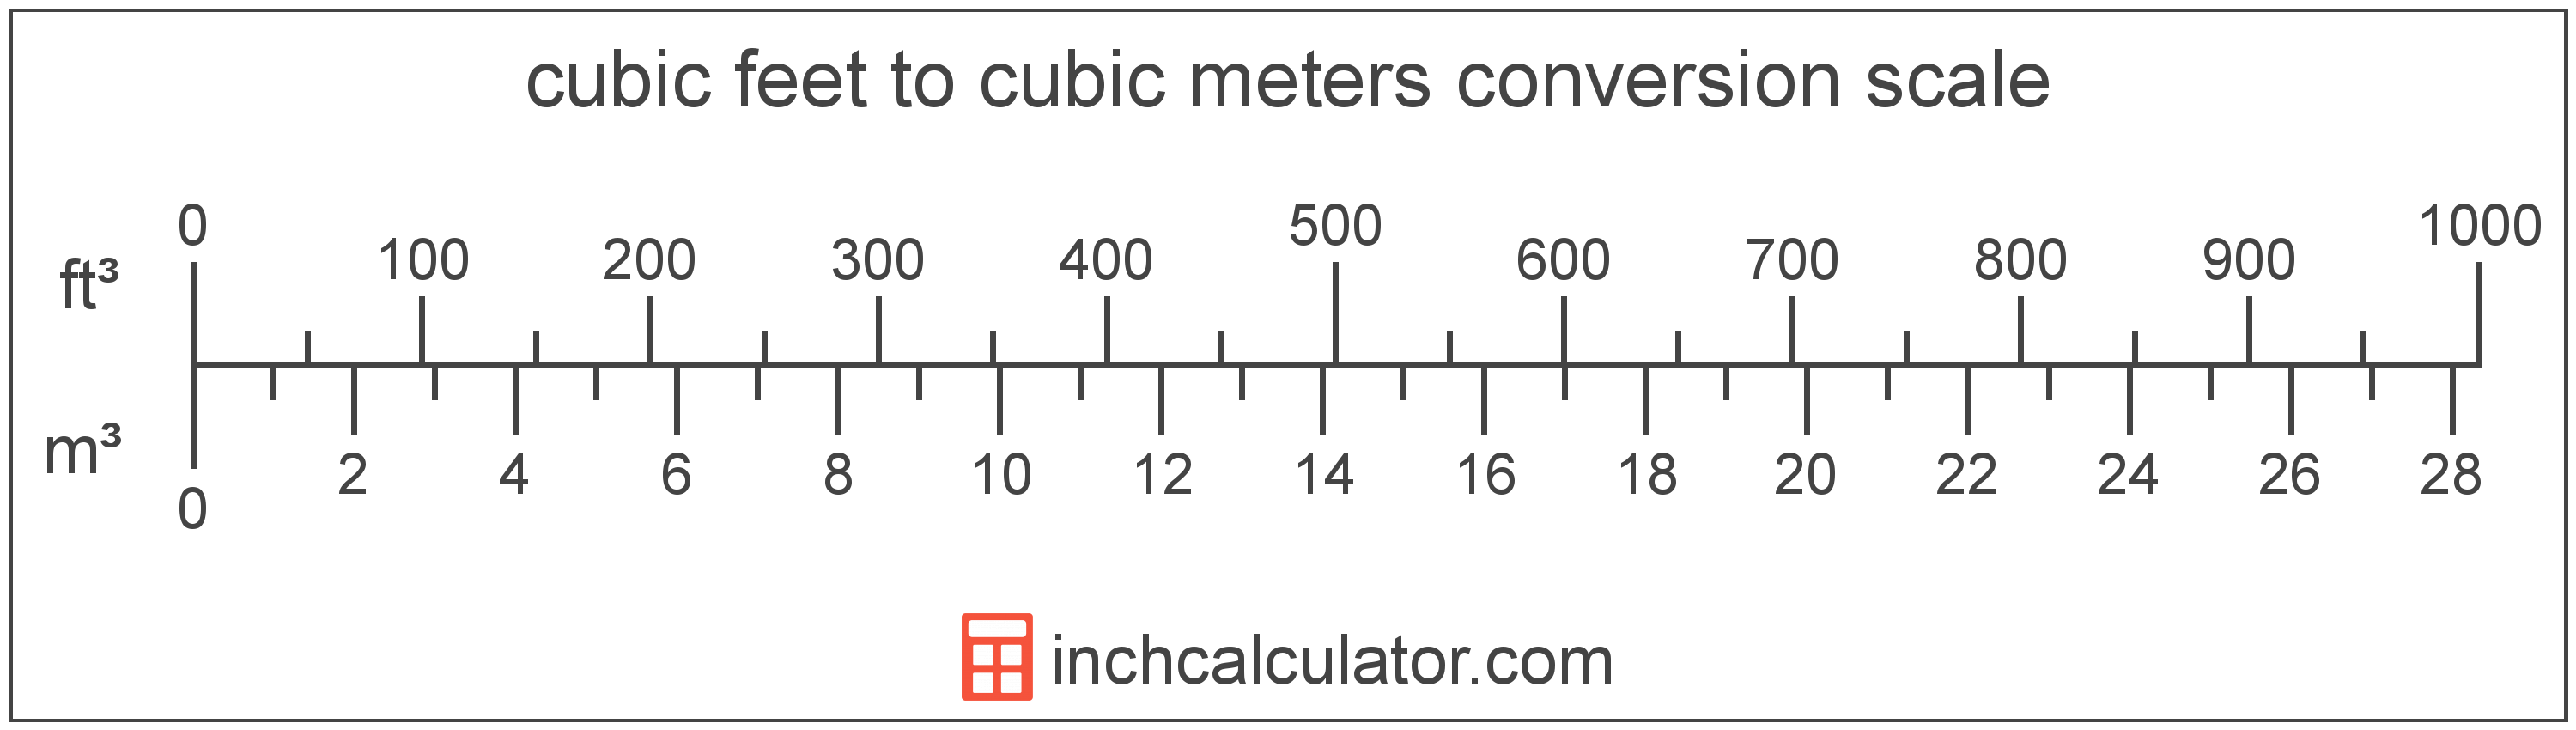 conversion scale showing cubic meters and equivalent cubic feet volume values